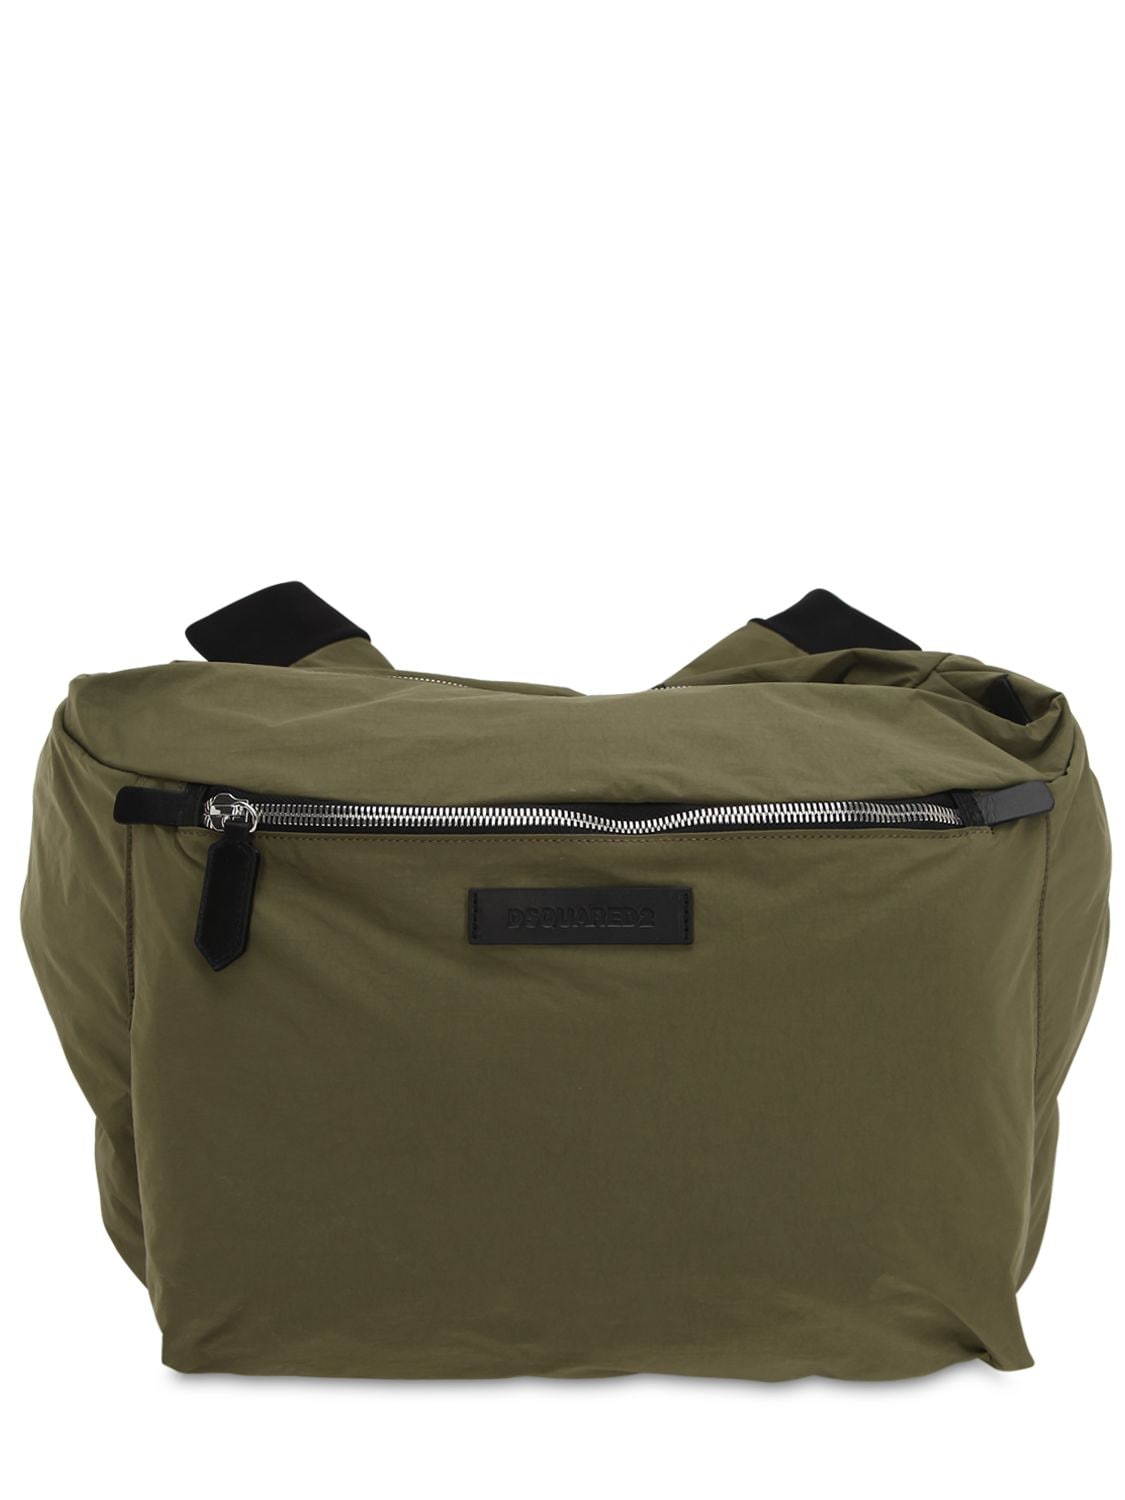 Dsquared2 Tech Nylon Belt Bag W/ Sleeve Strap In Army Green